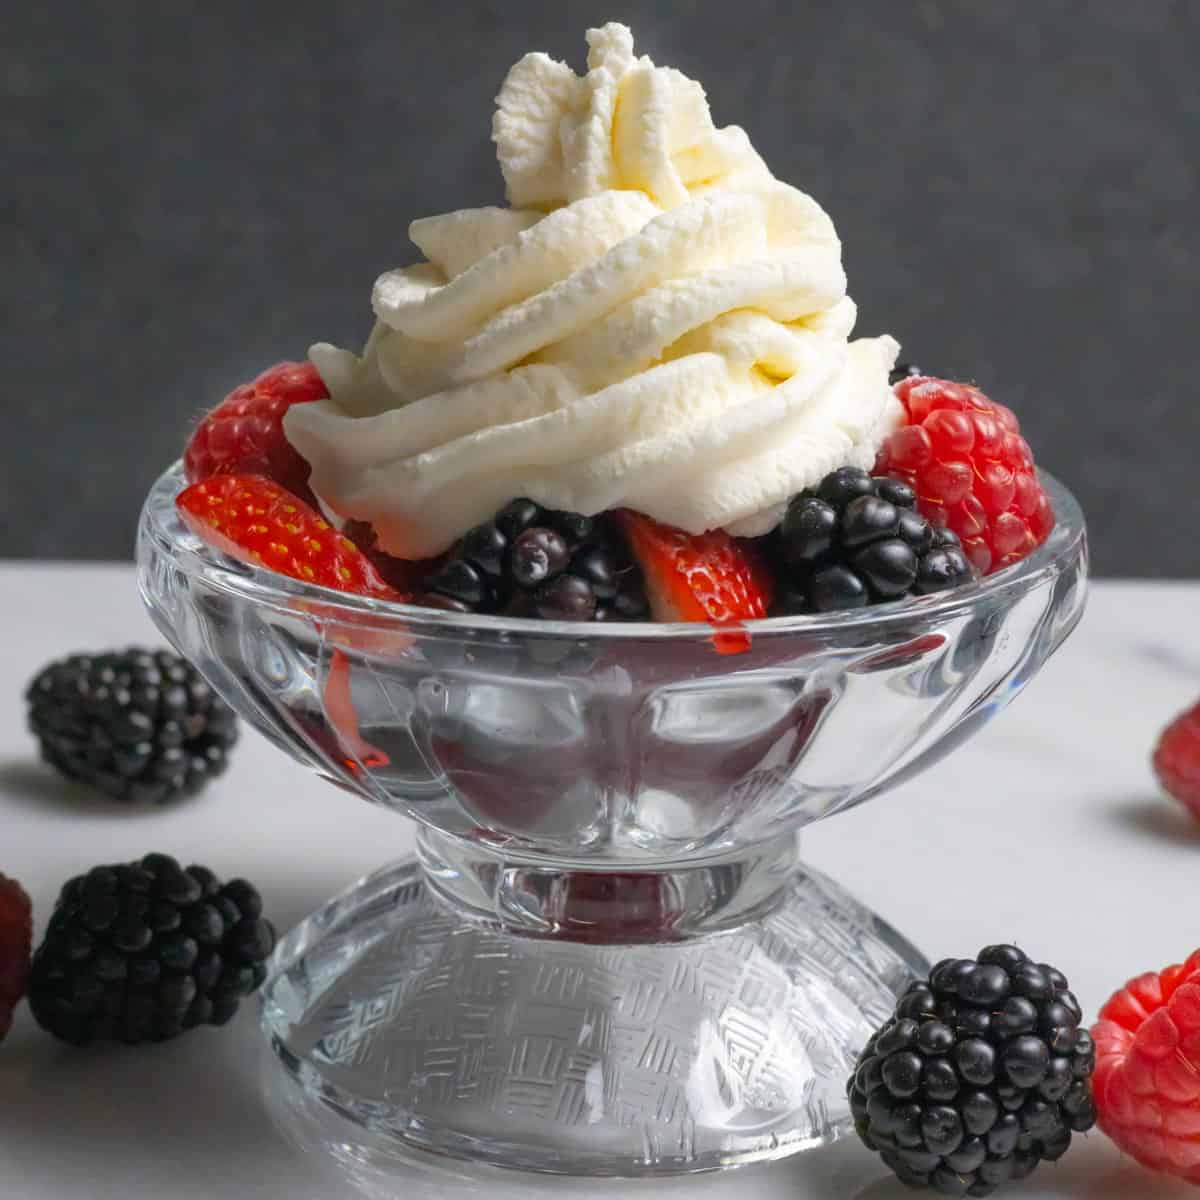 https://radfoodie.com/wp-content/uploads/2023/03/low-carb-whipped-cream-on-berries-square.jpg